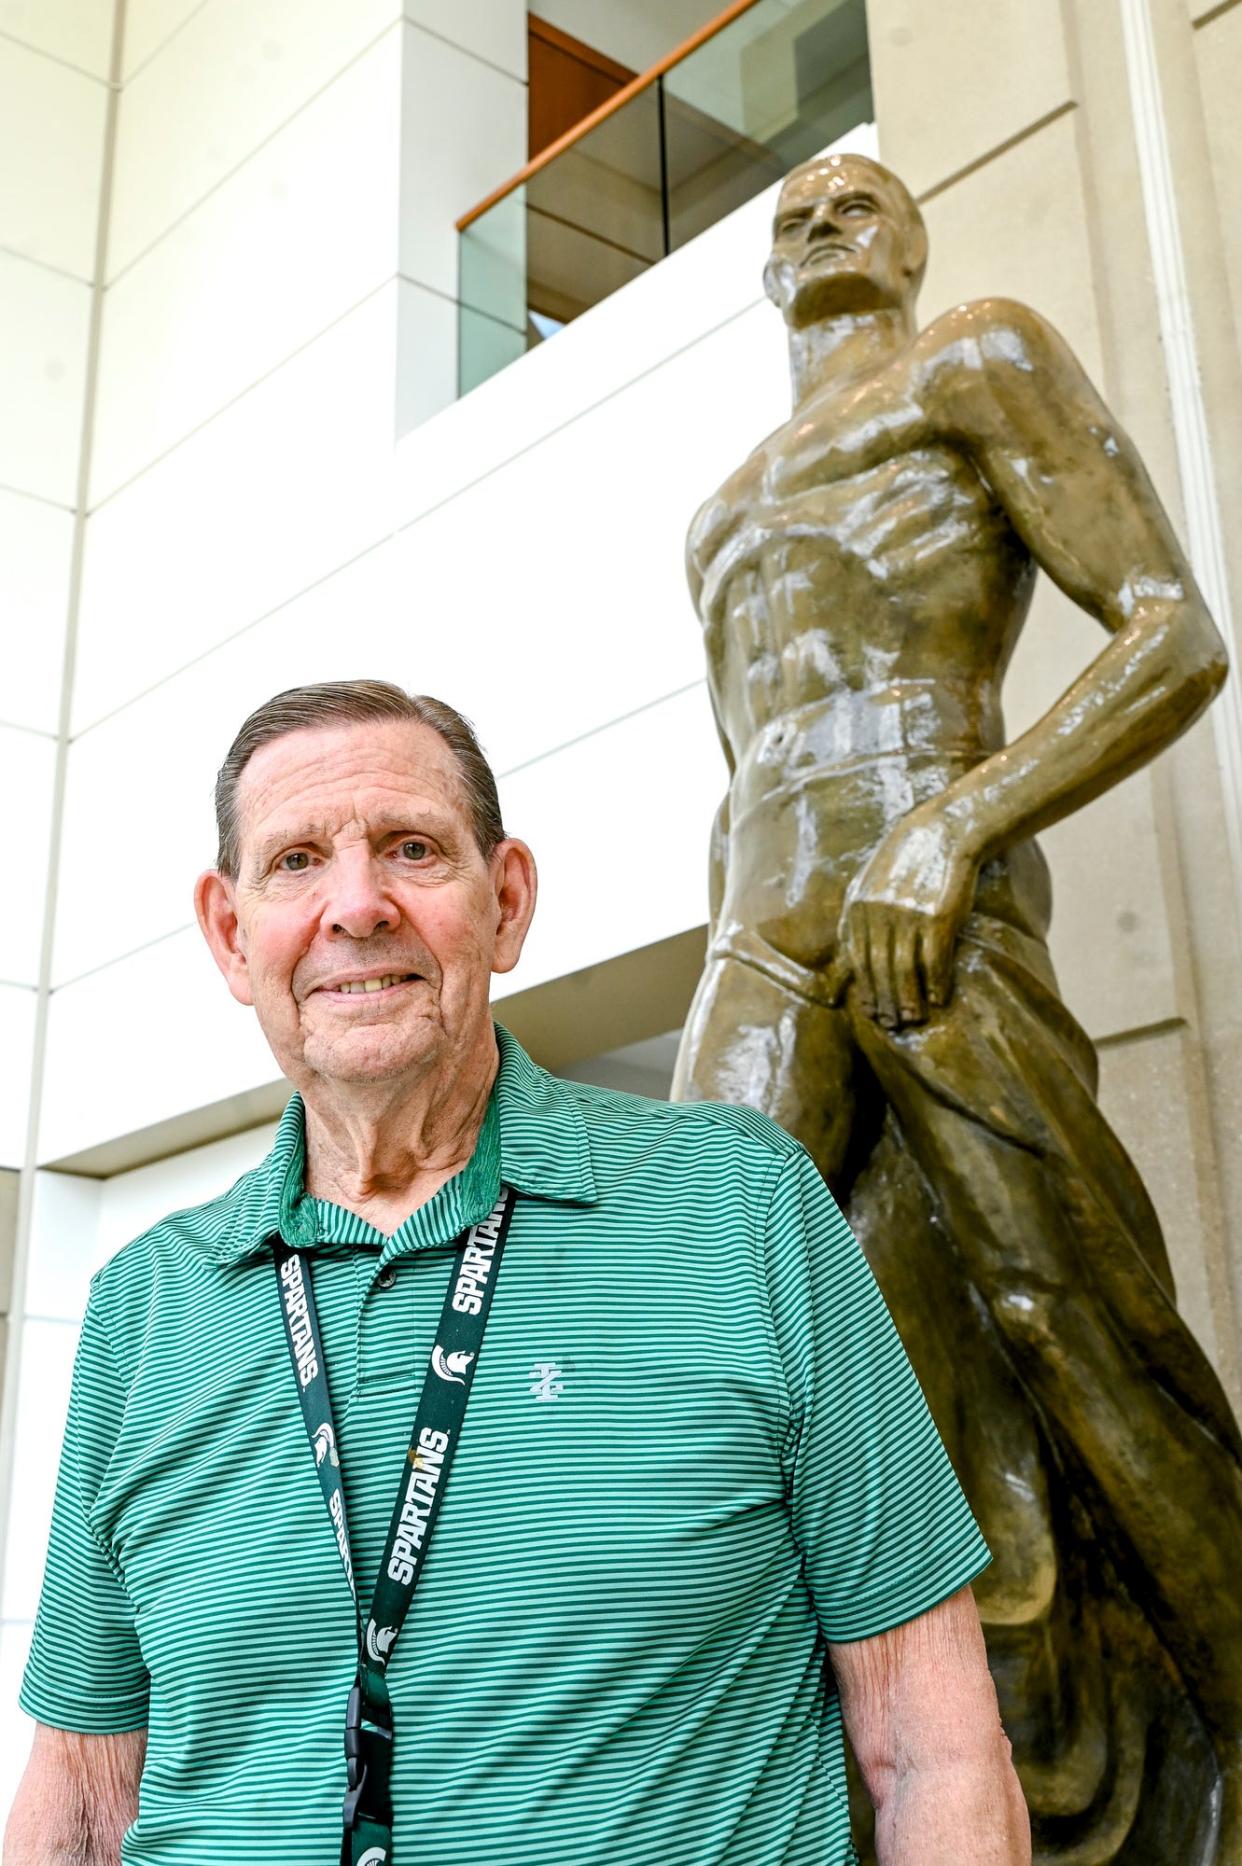 Cyrus Stewart, one of the first Sparty mascots, poses next to the Sparty statue on Wednesday, June 15, 2023, at Spartan Stadium on the Michigan State University campus in East Lansing.